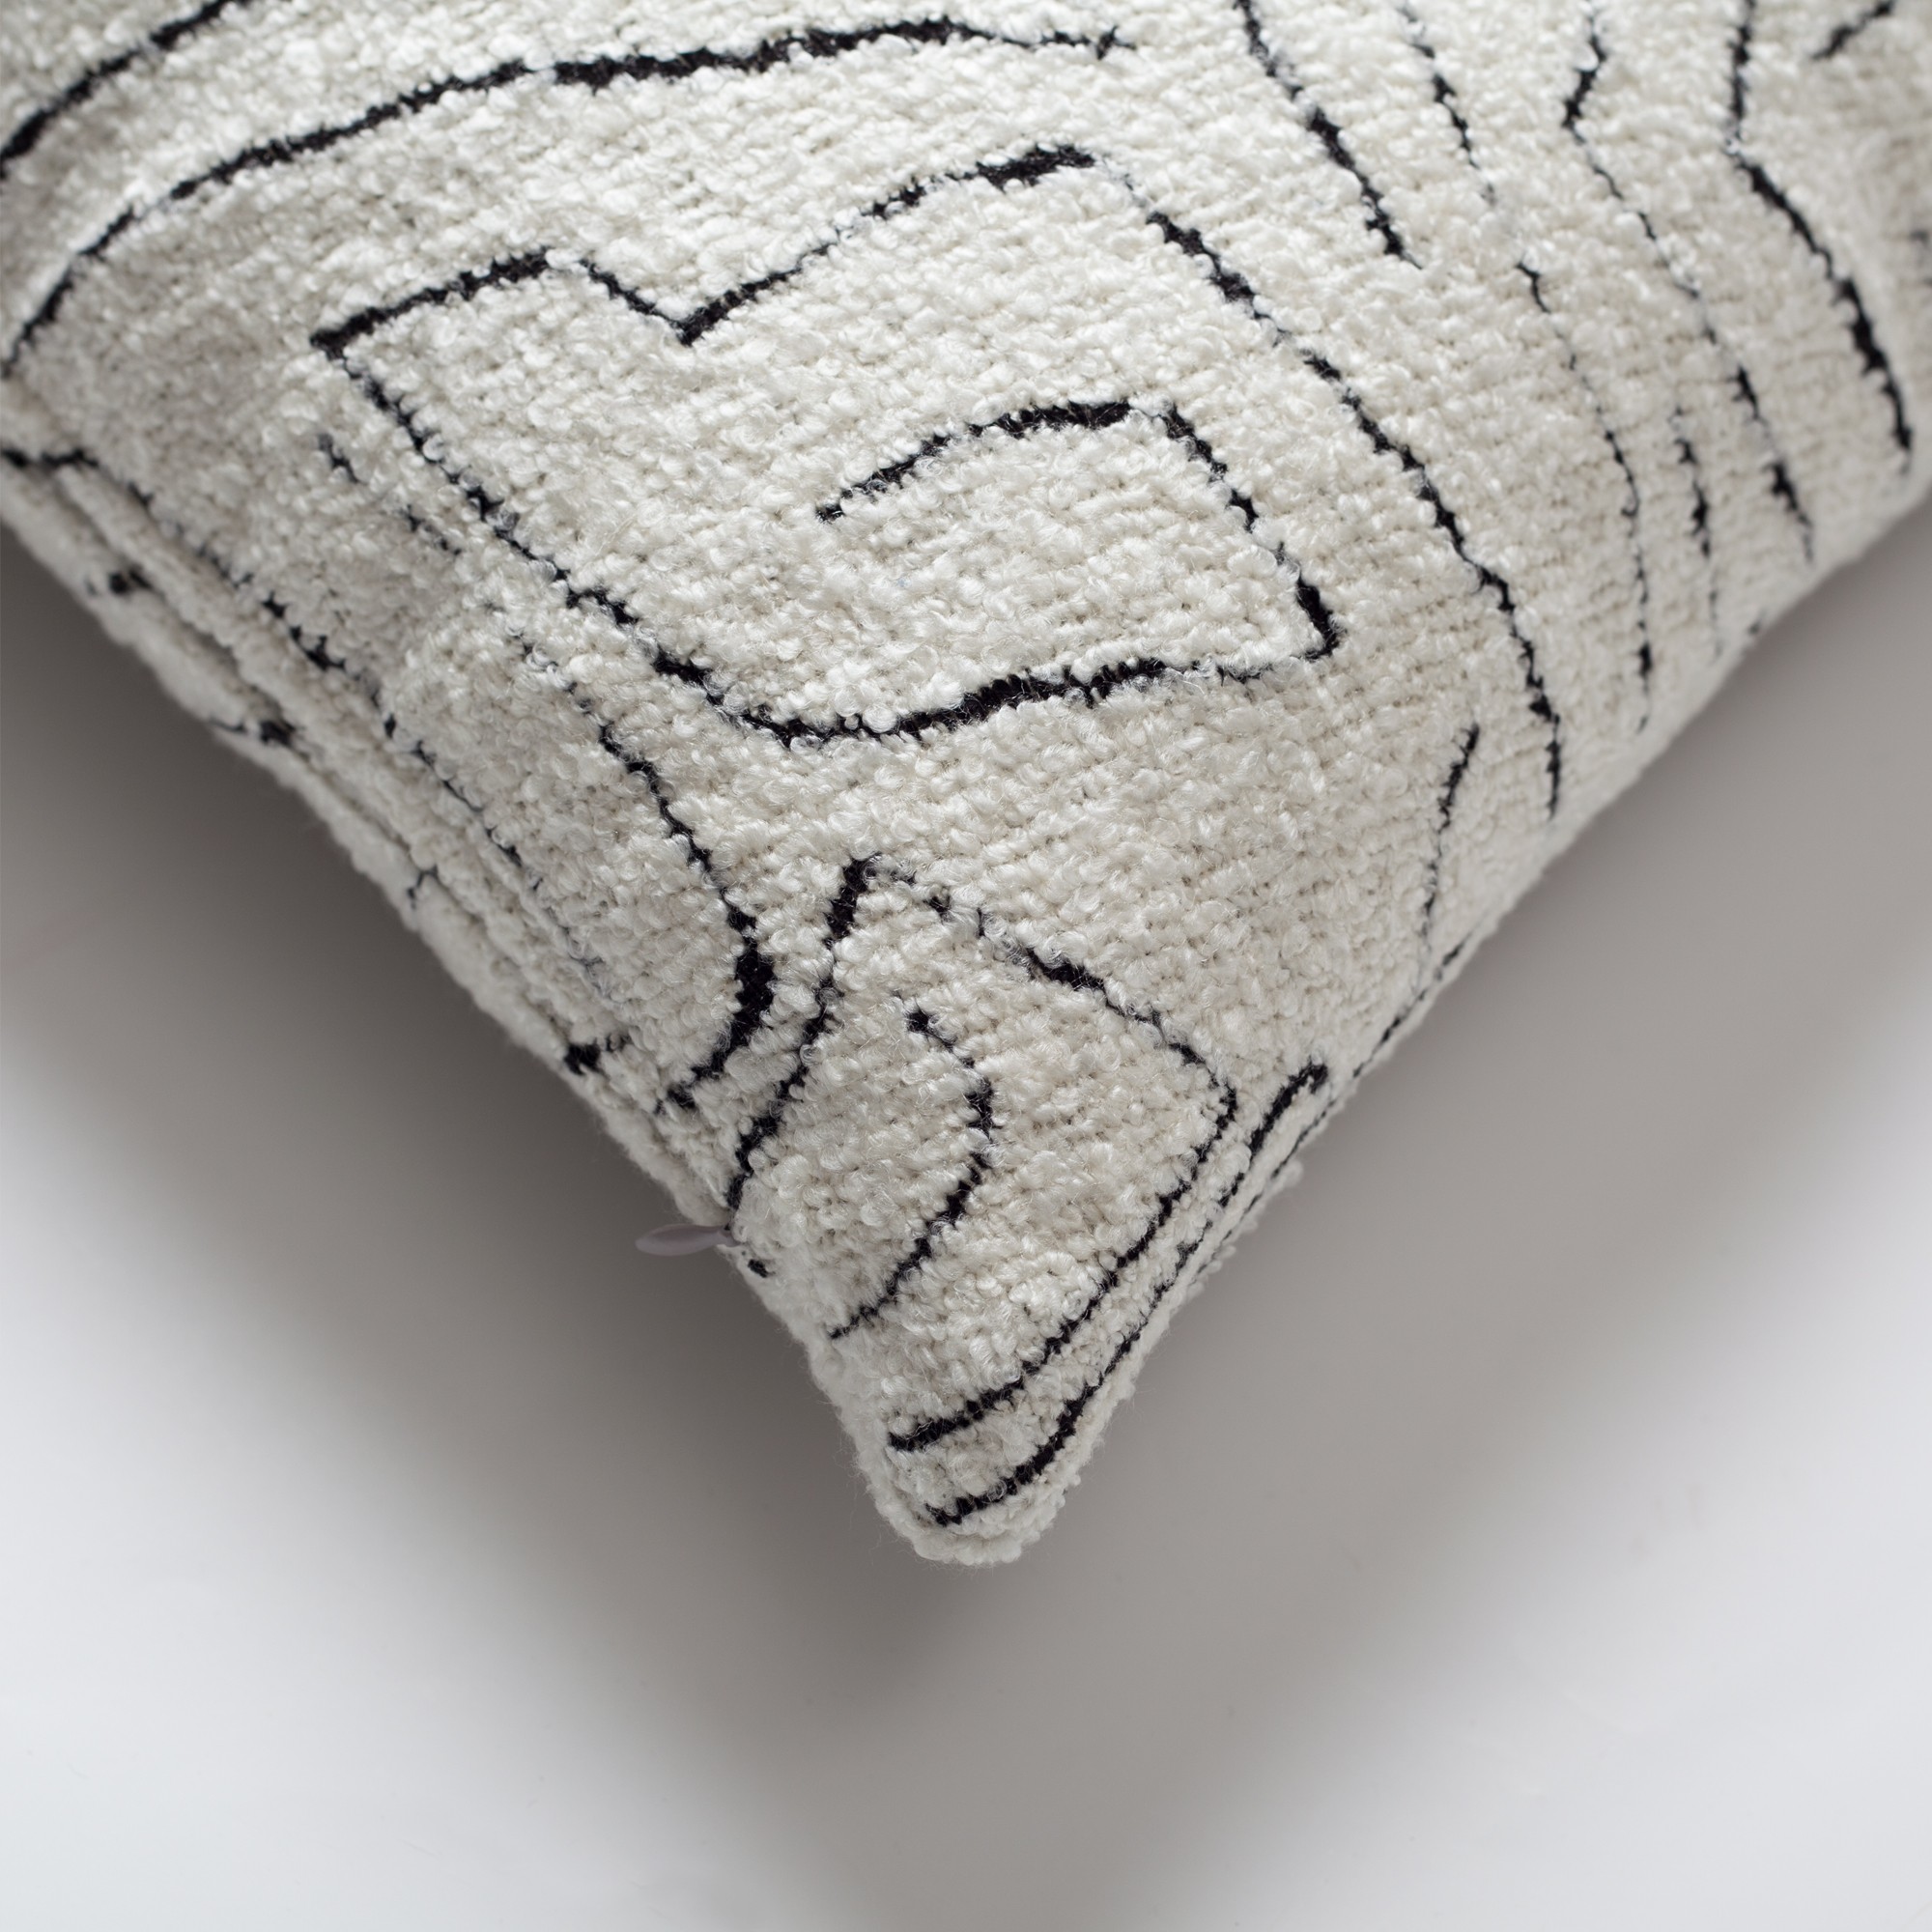 "Amorf" - Abstract Patterned 20x20 Inch Cushion - White and Black (Cover Only)